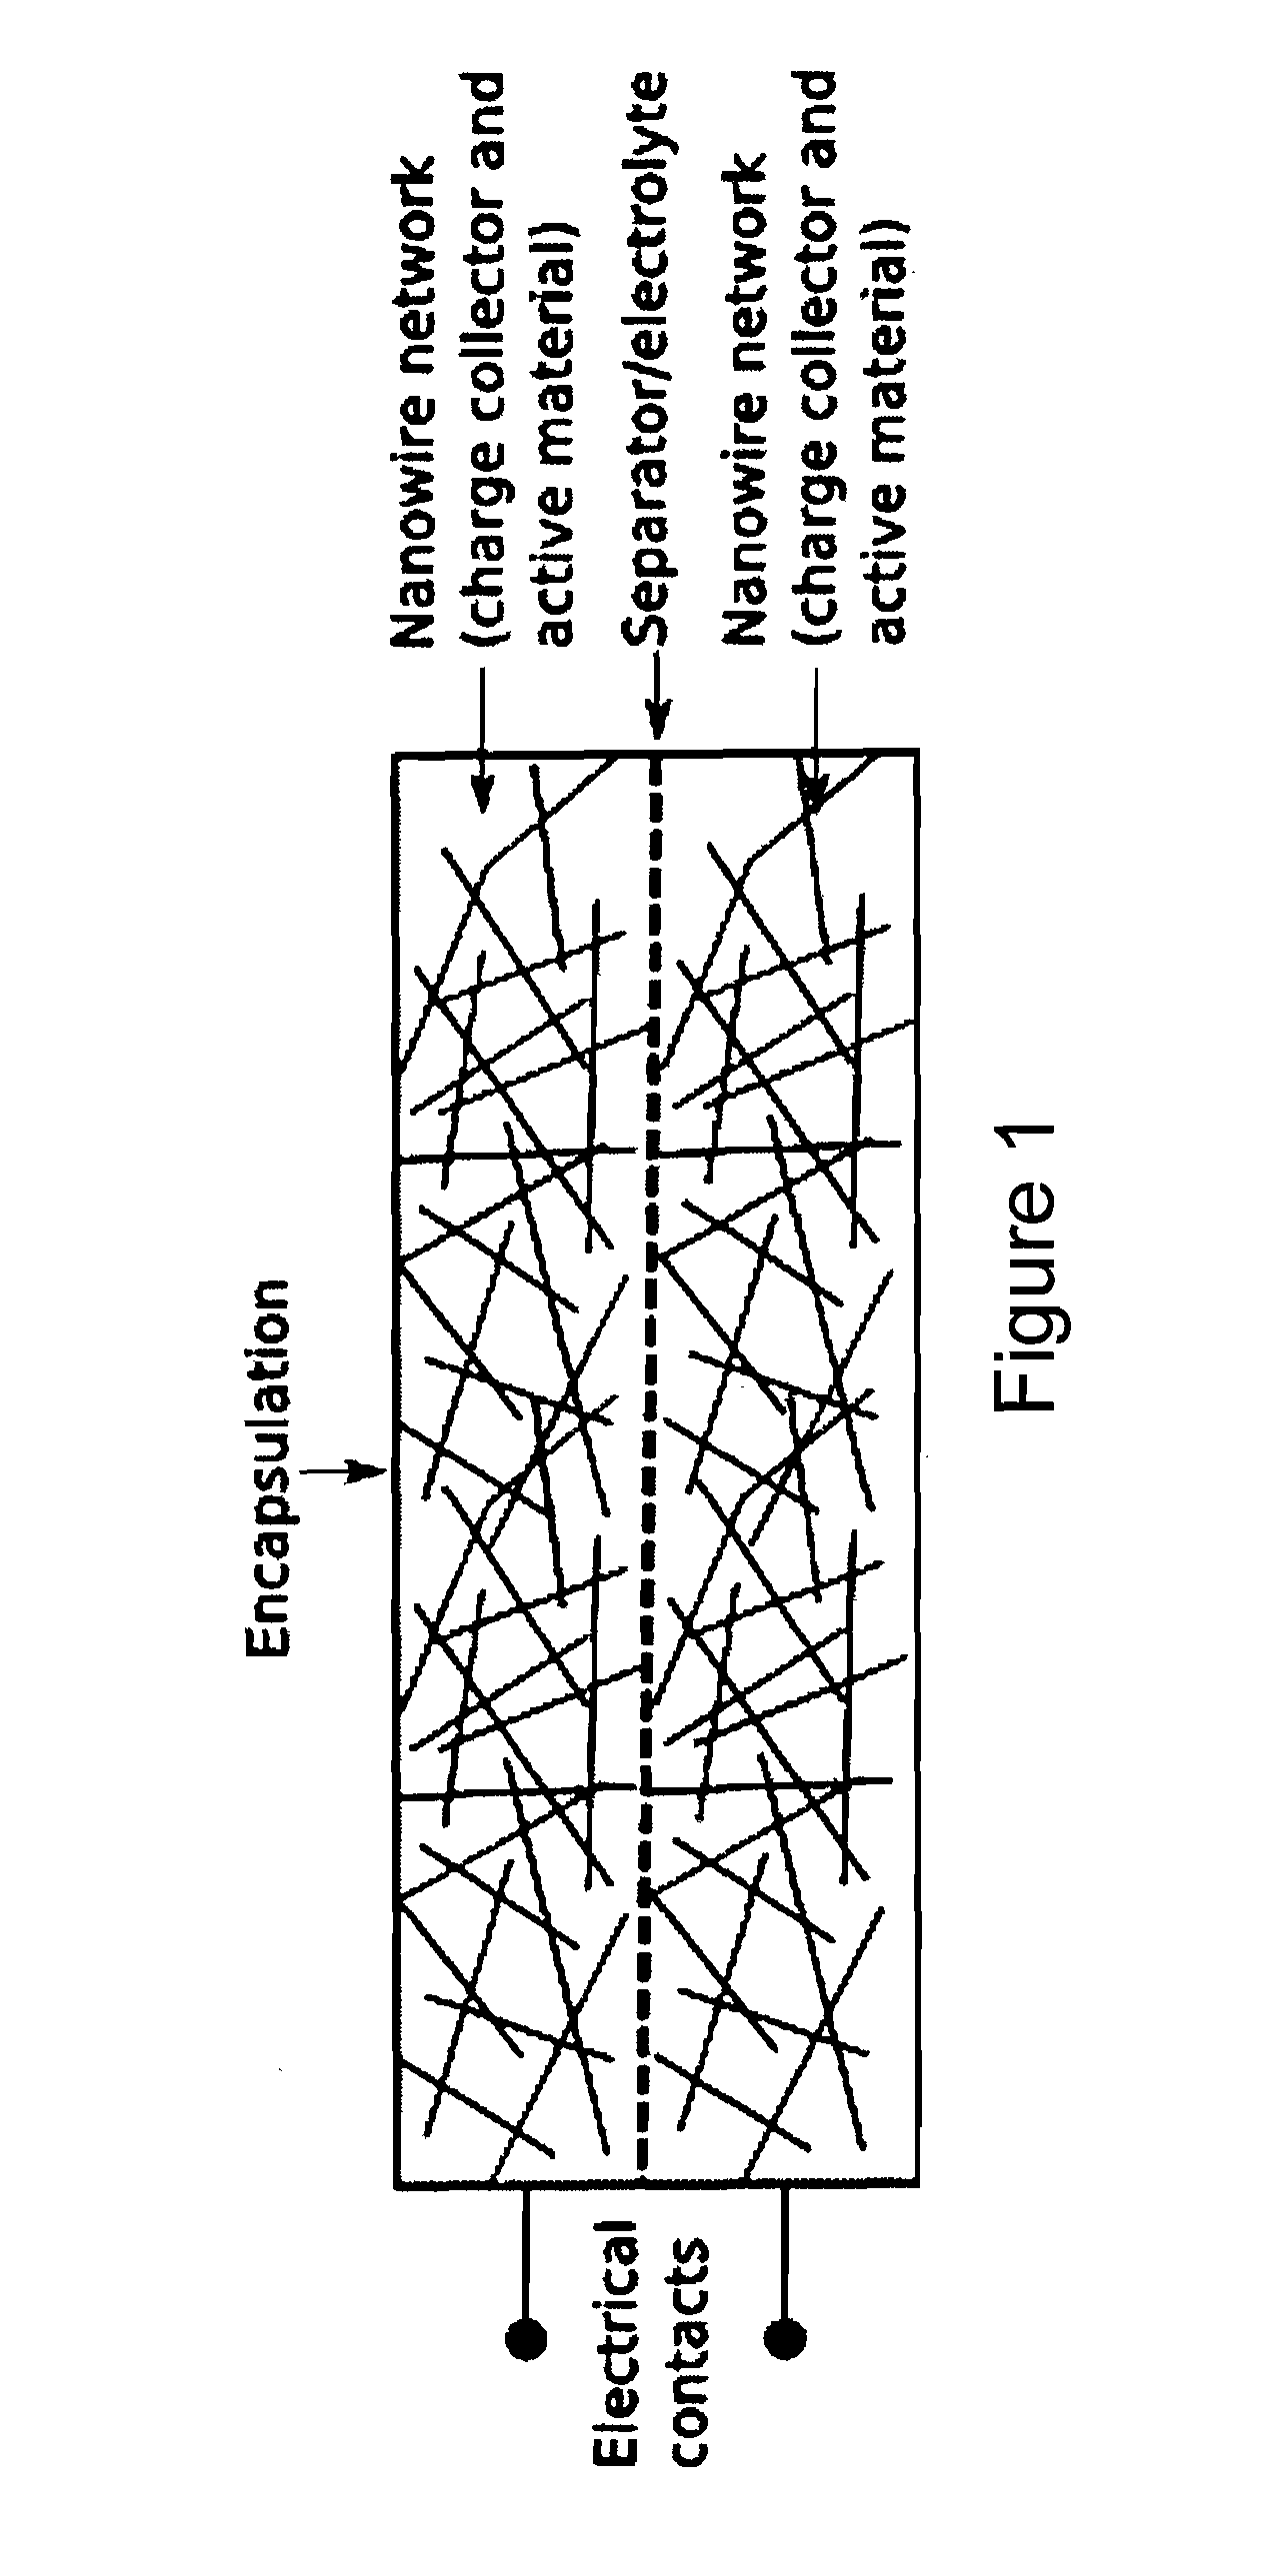 Charge storage devices containing carbon nanotube films as electrodes and charge collectors